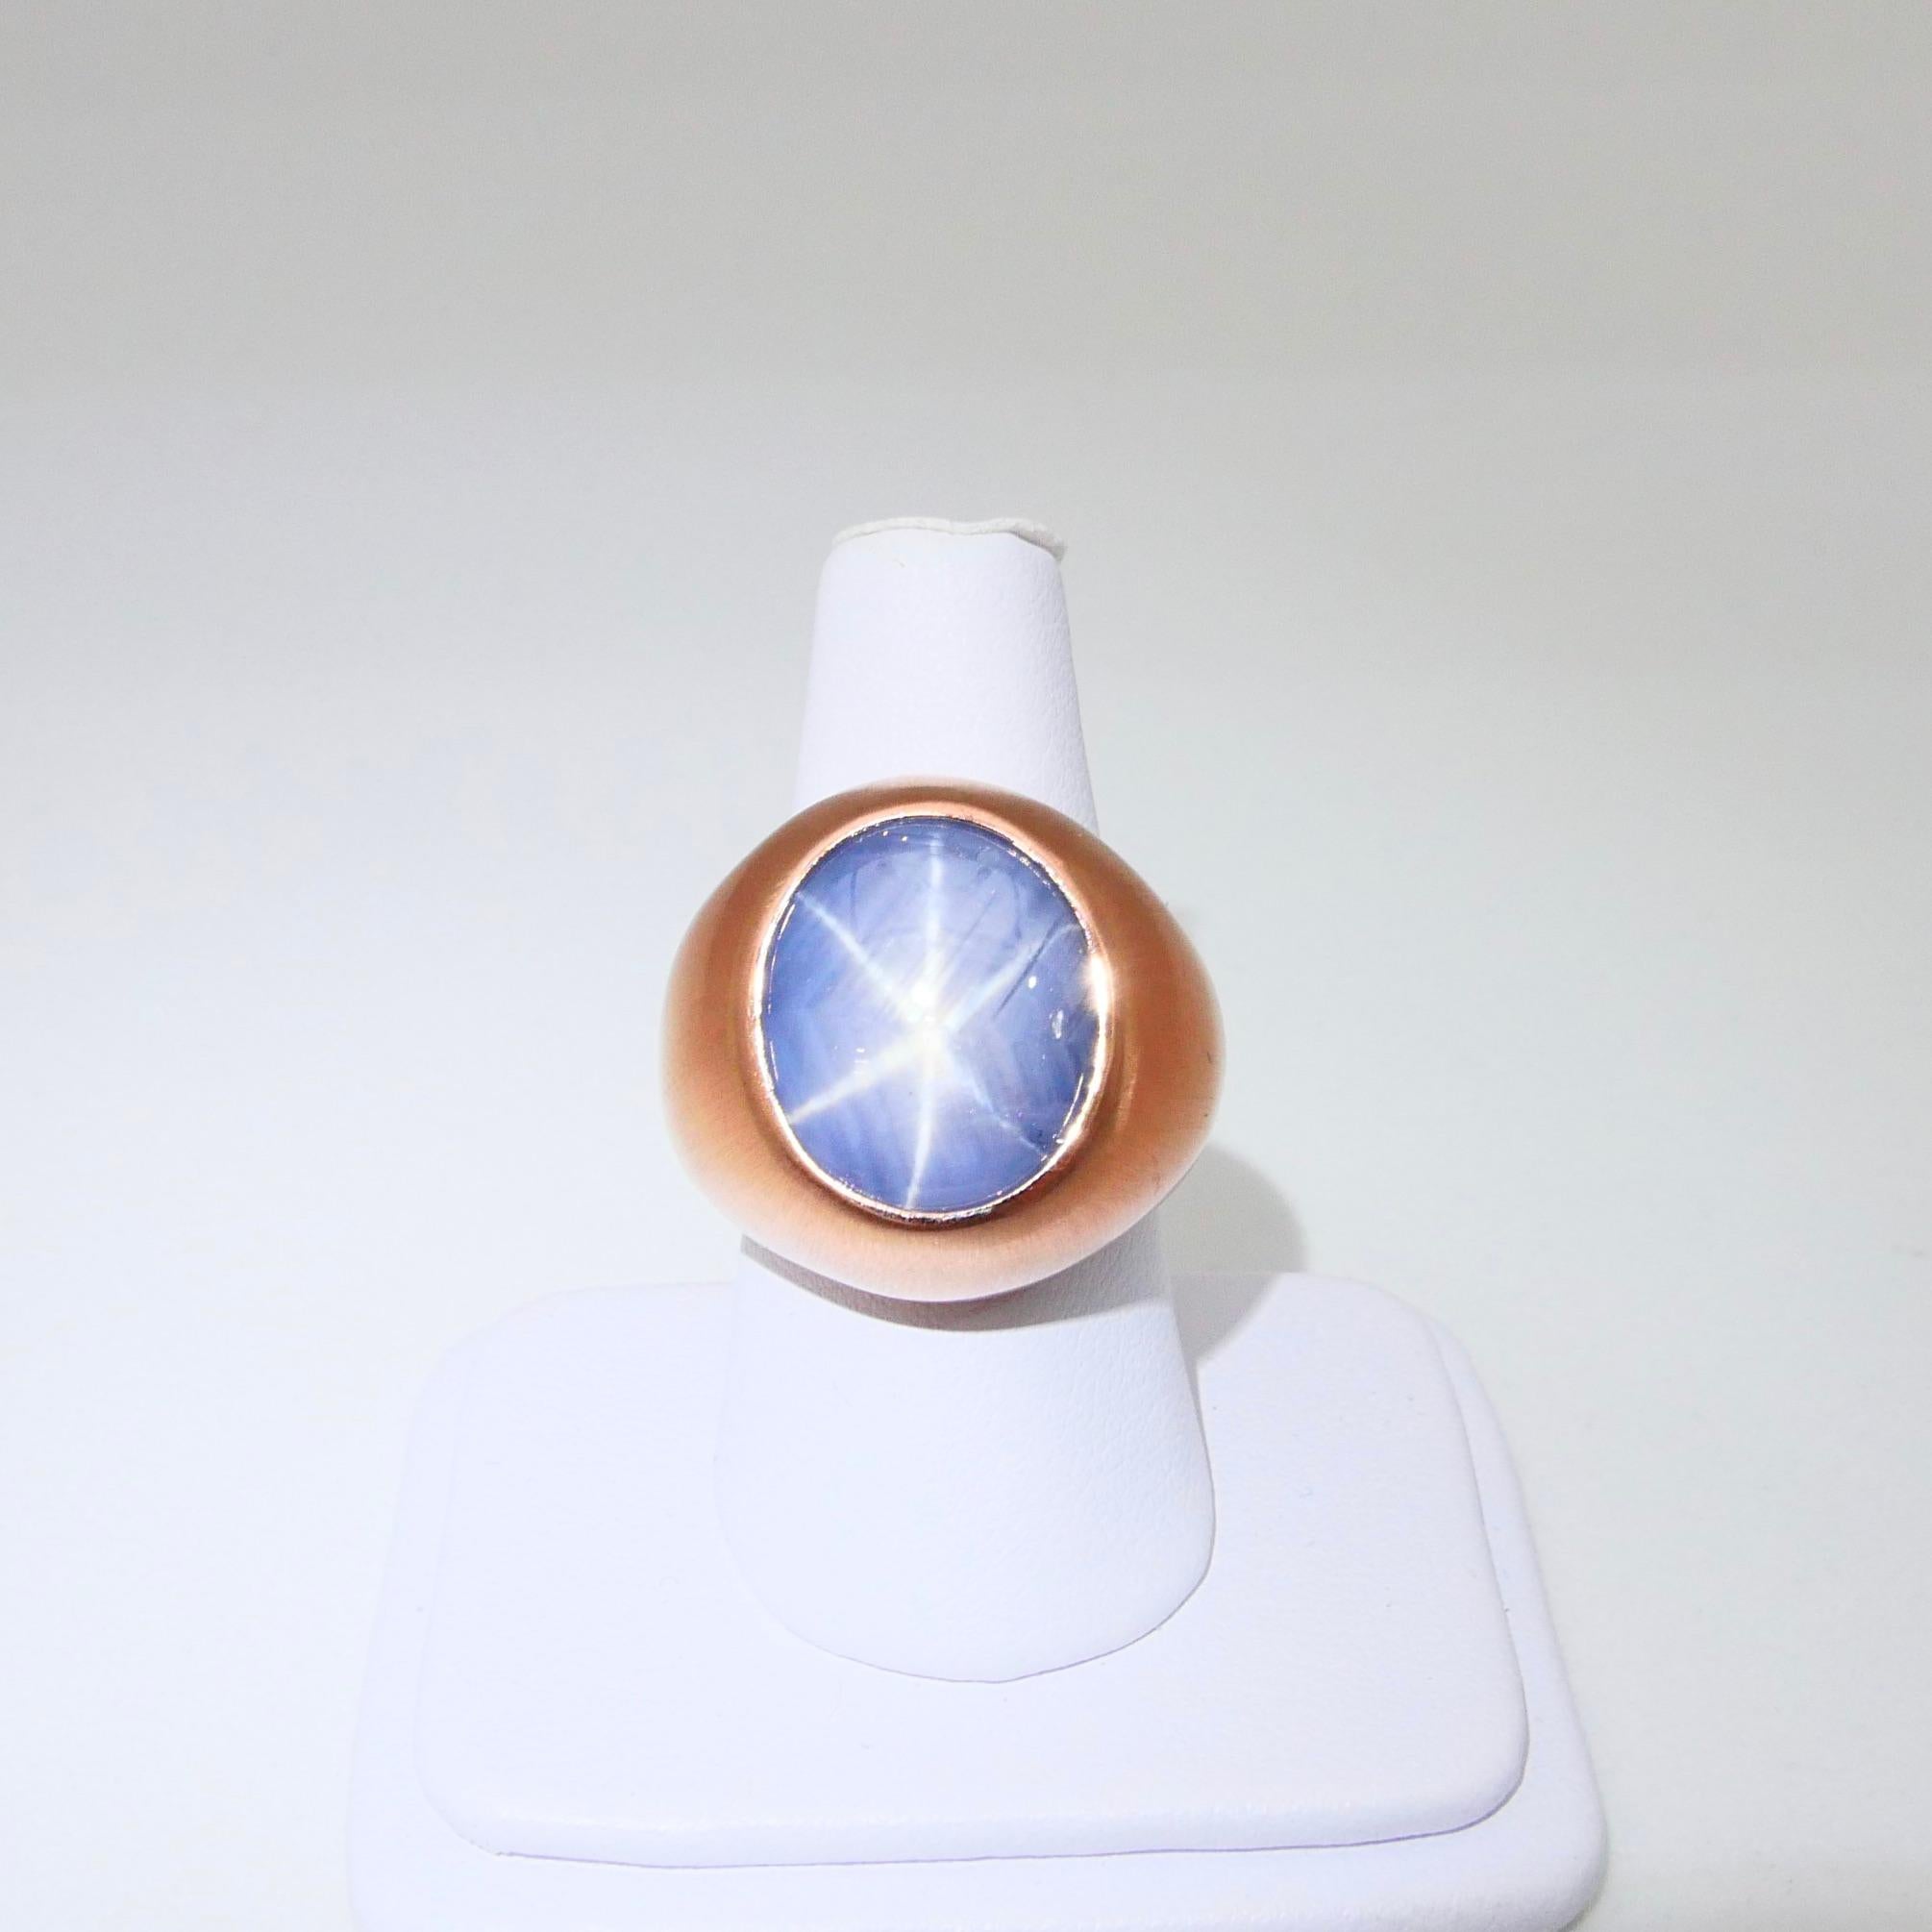 Certified Blue Star Sapphire 39.28 Carat Rose Gold Ring, Unisex, Strong Star 12